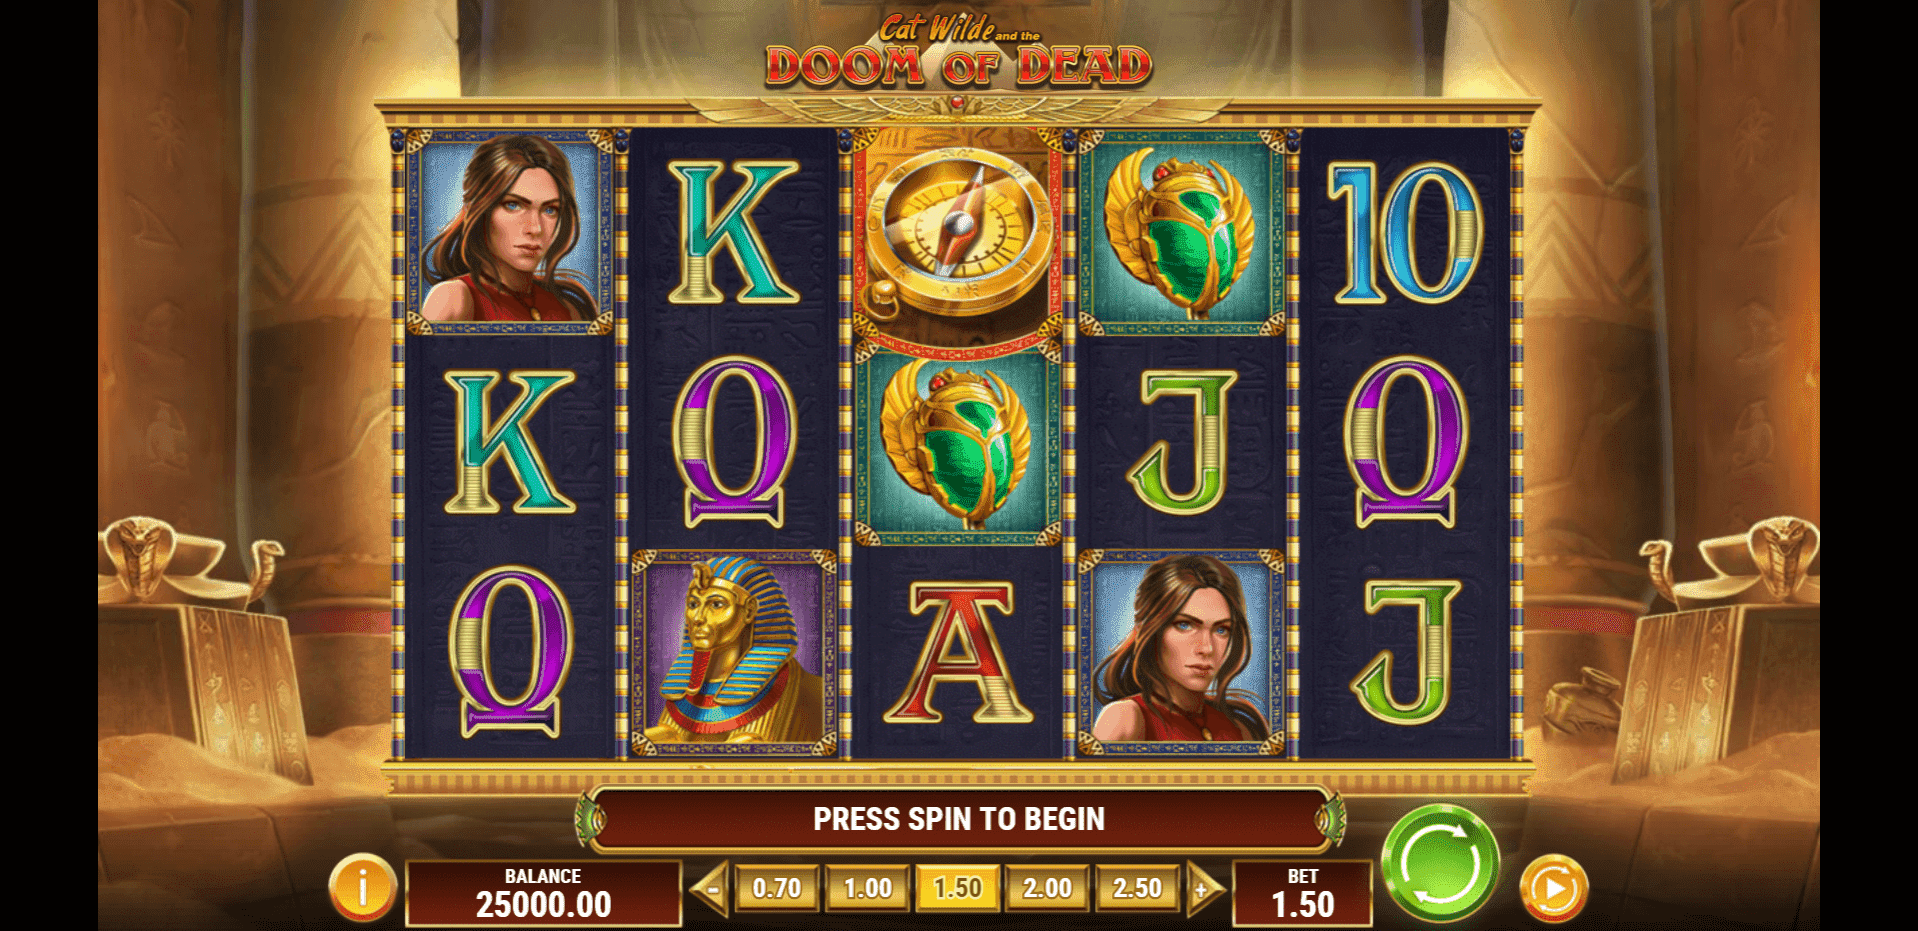 Cat Wilde and the Doom of Dead slot play free